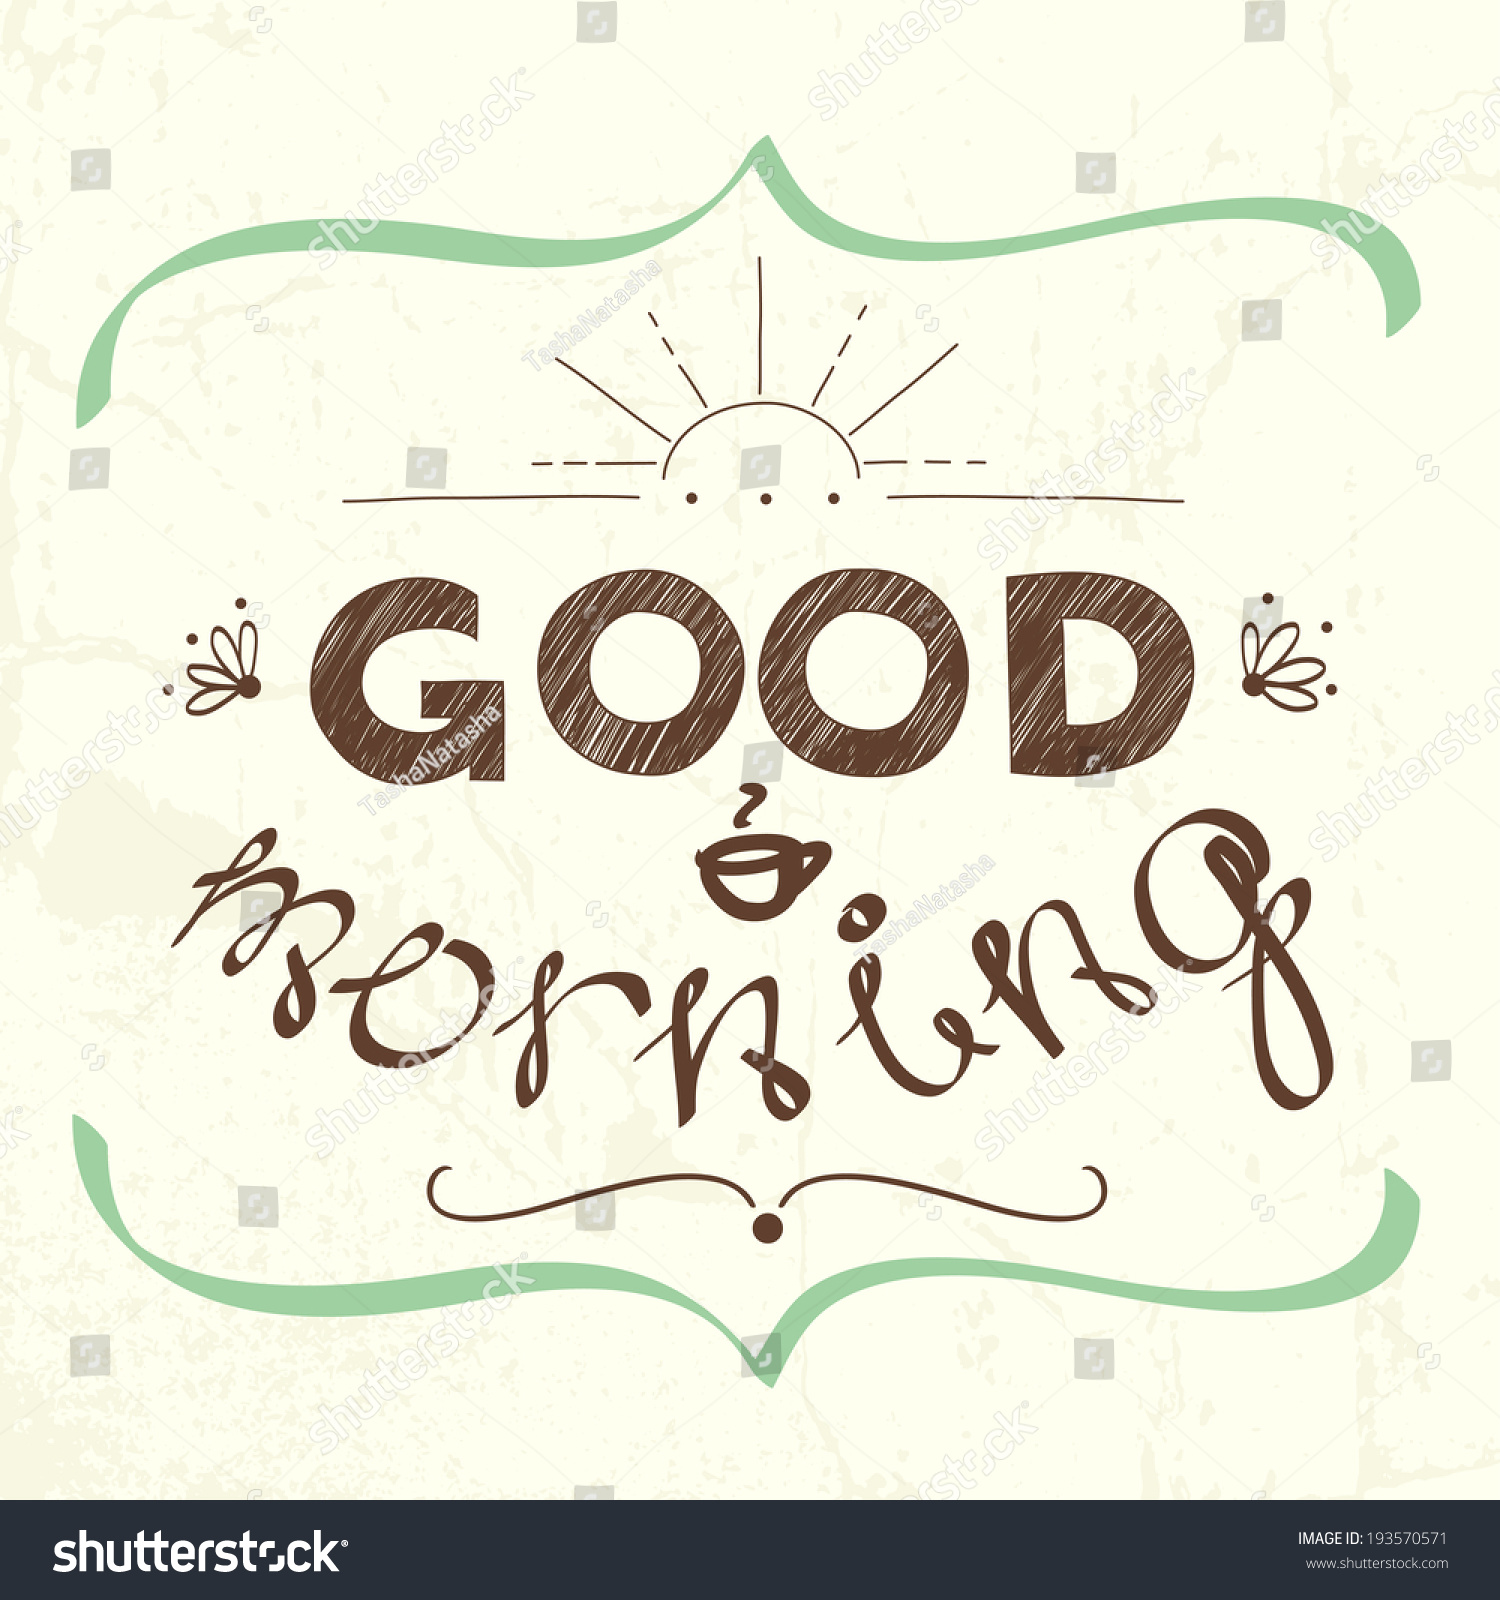 Good Morning Hand Lettering On A Chalkboard Background. Stylized